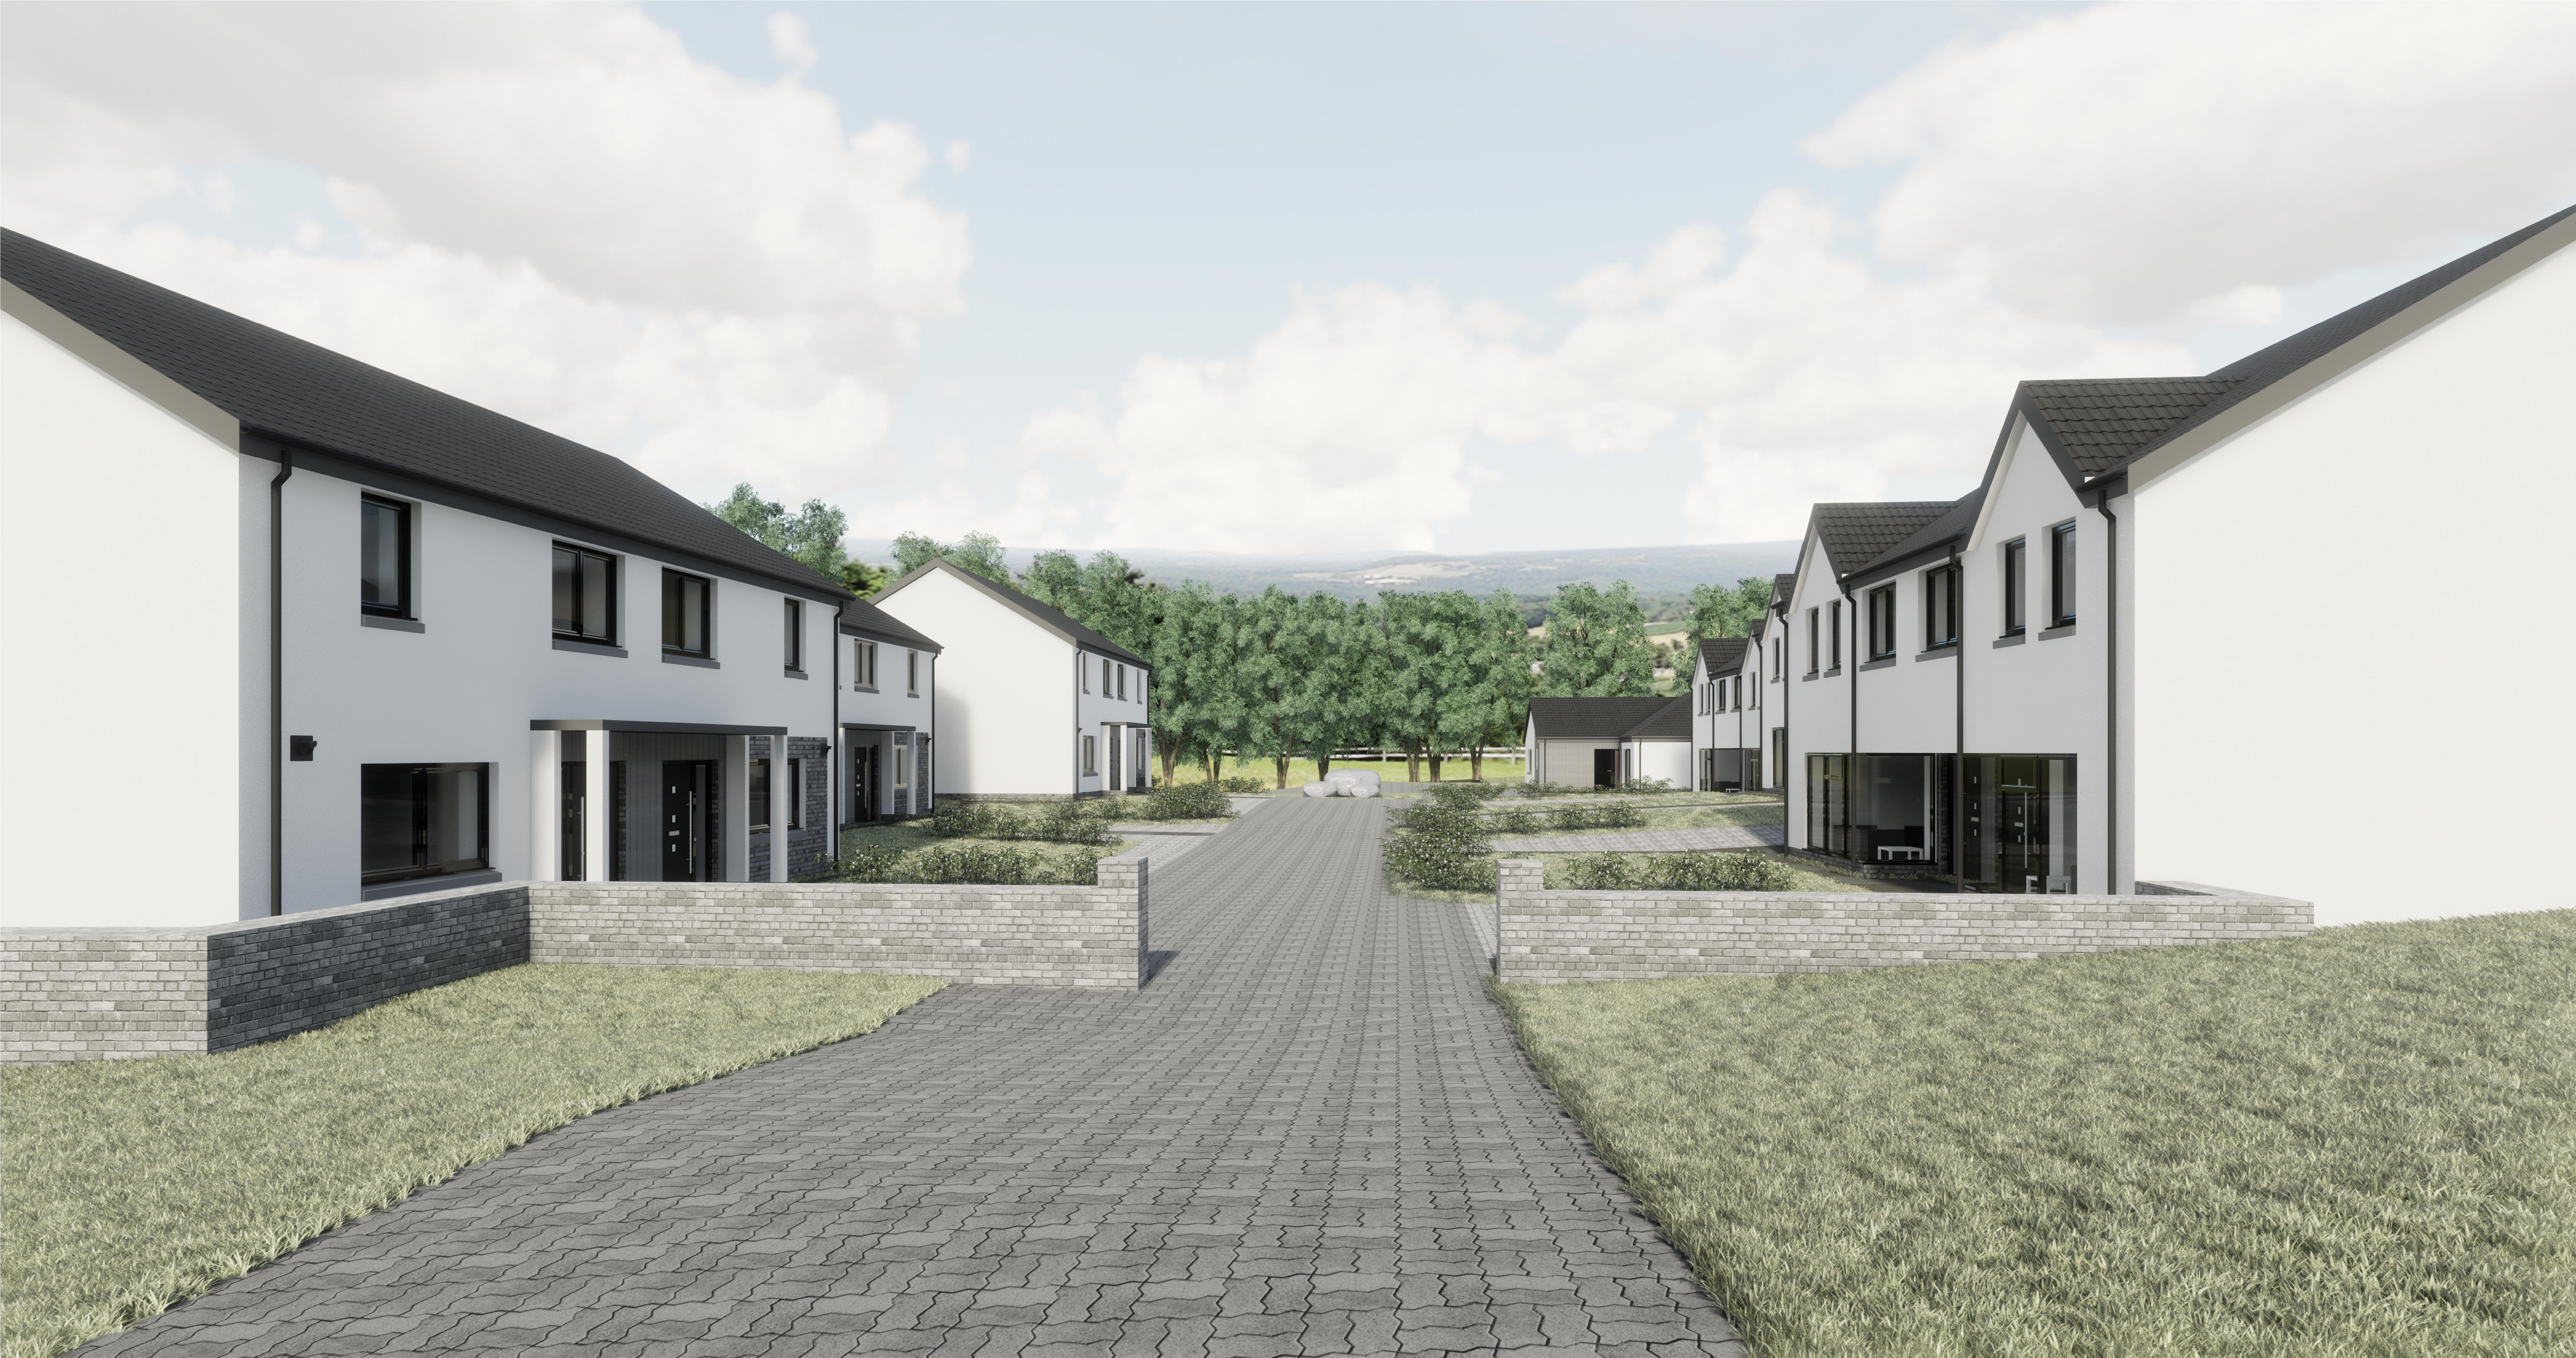 Eildon to trial modern construction methods on new affordable green homes in the Borders